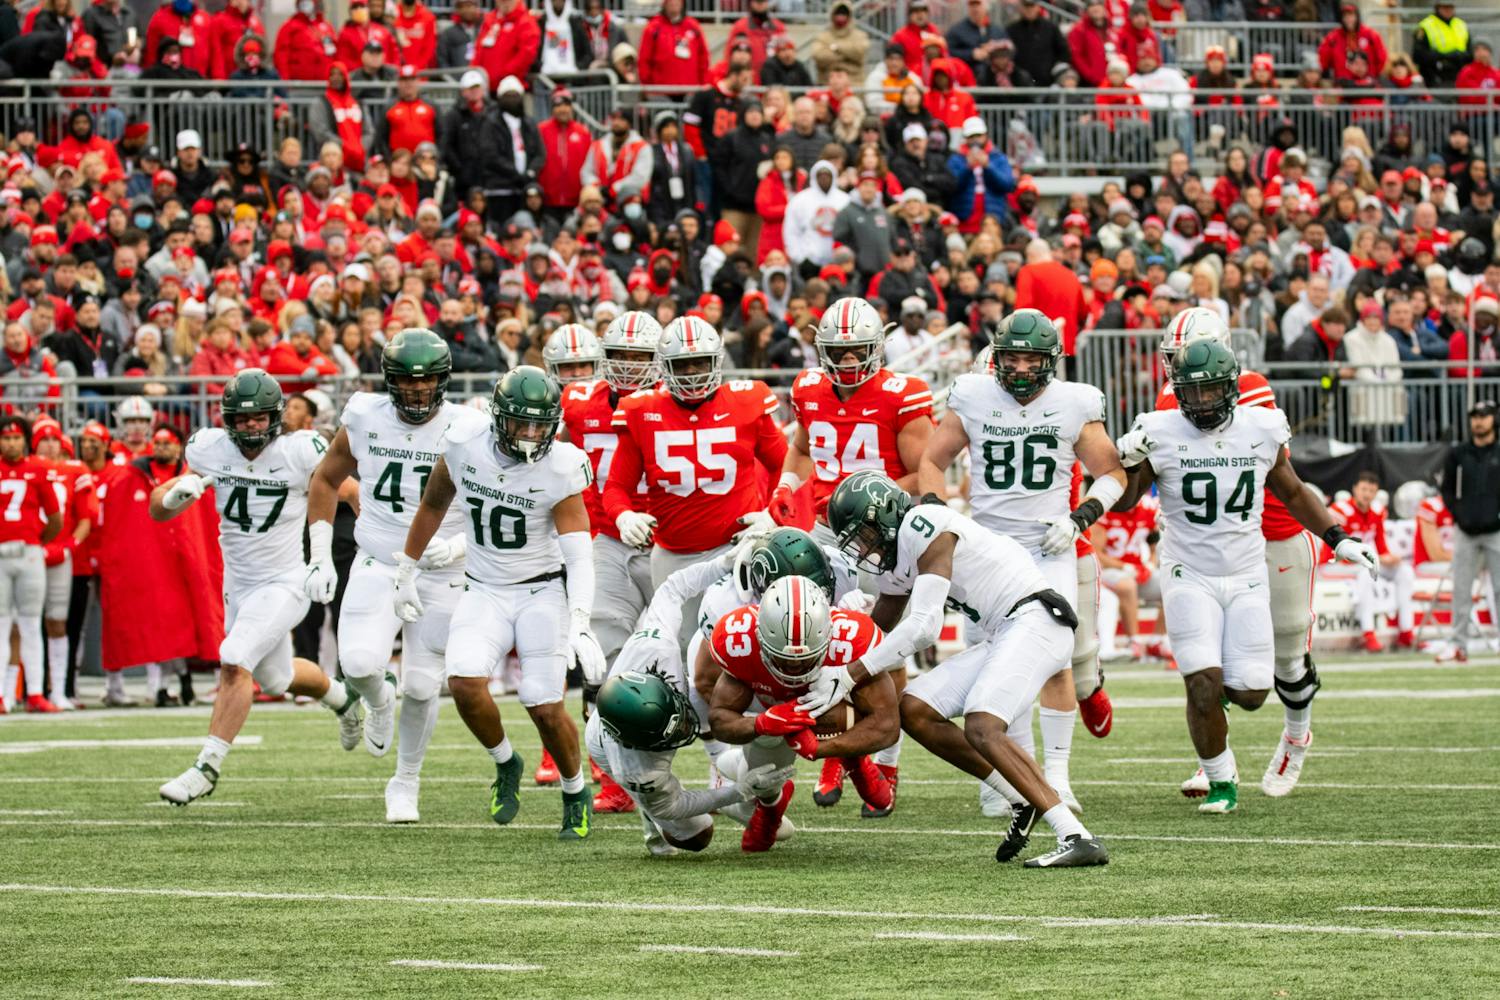 Inside the mind of Emeka Egbuka as he chases perfection as an Ohio State  football player 